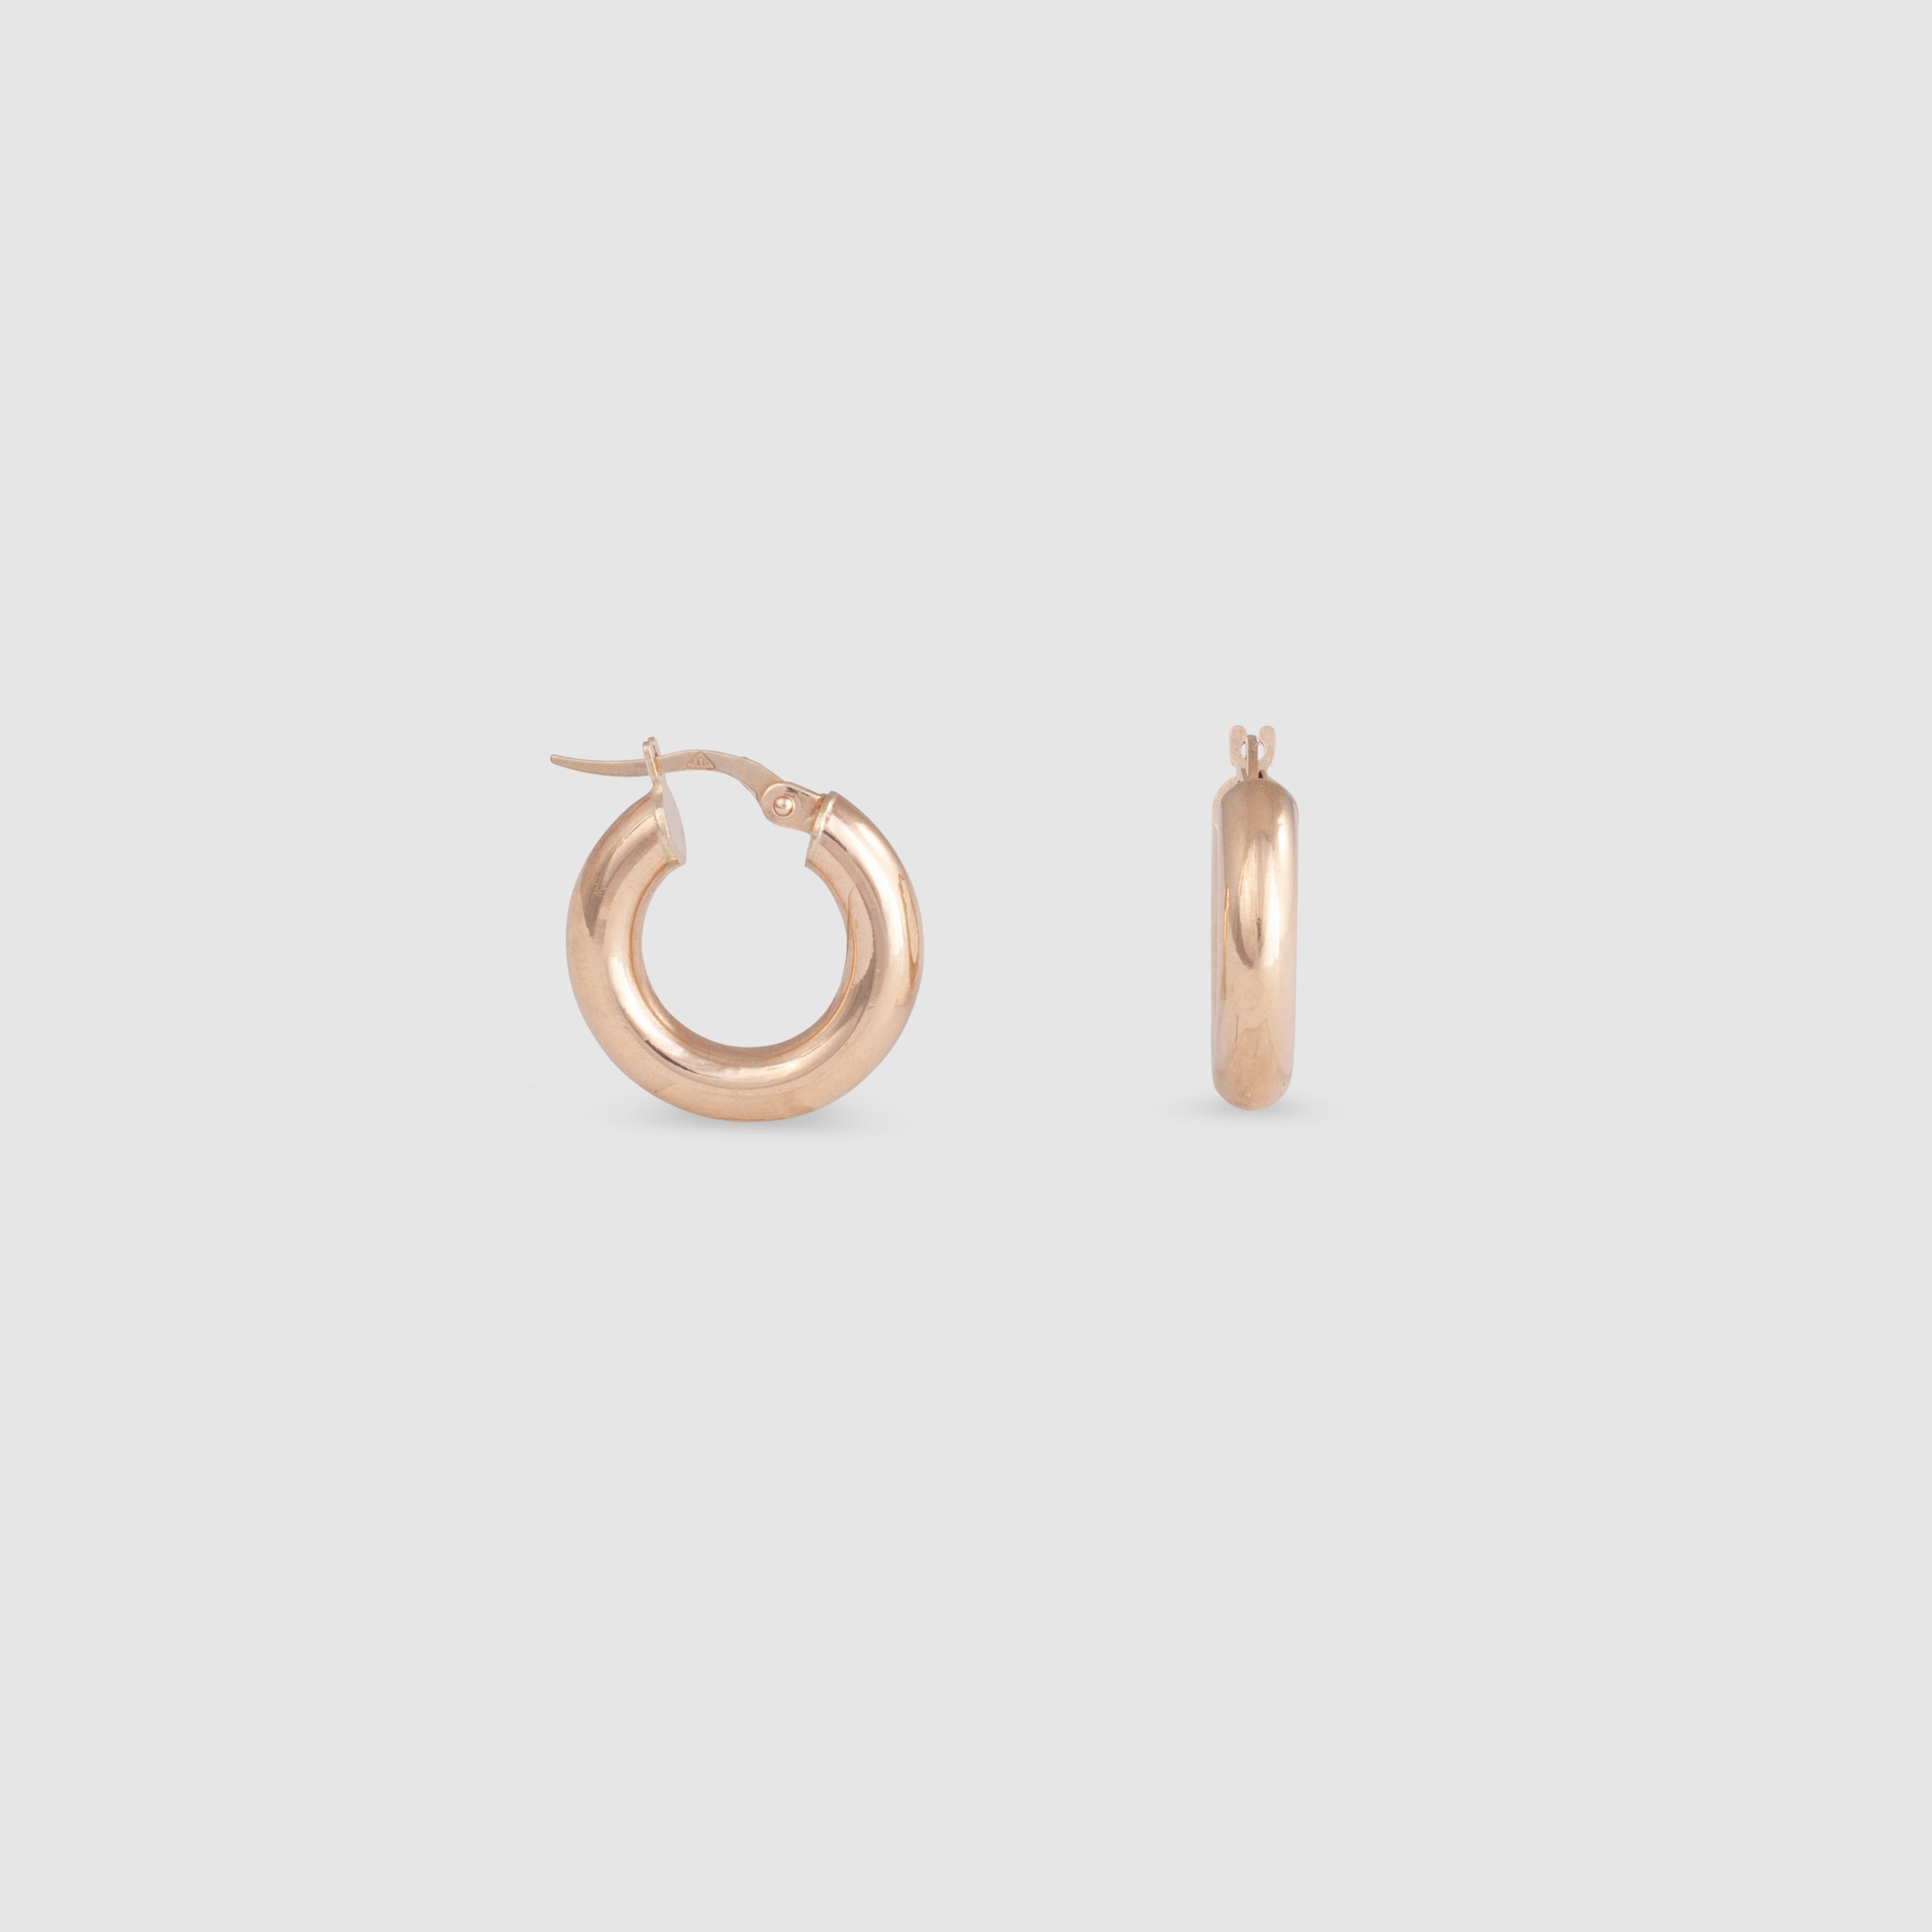 Small thick 10k solid yellow gold hoop earrings